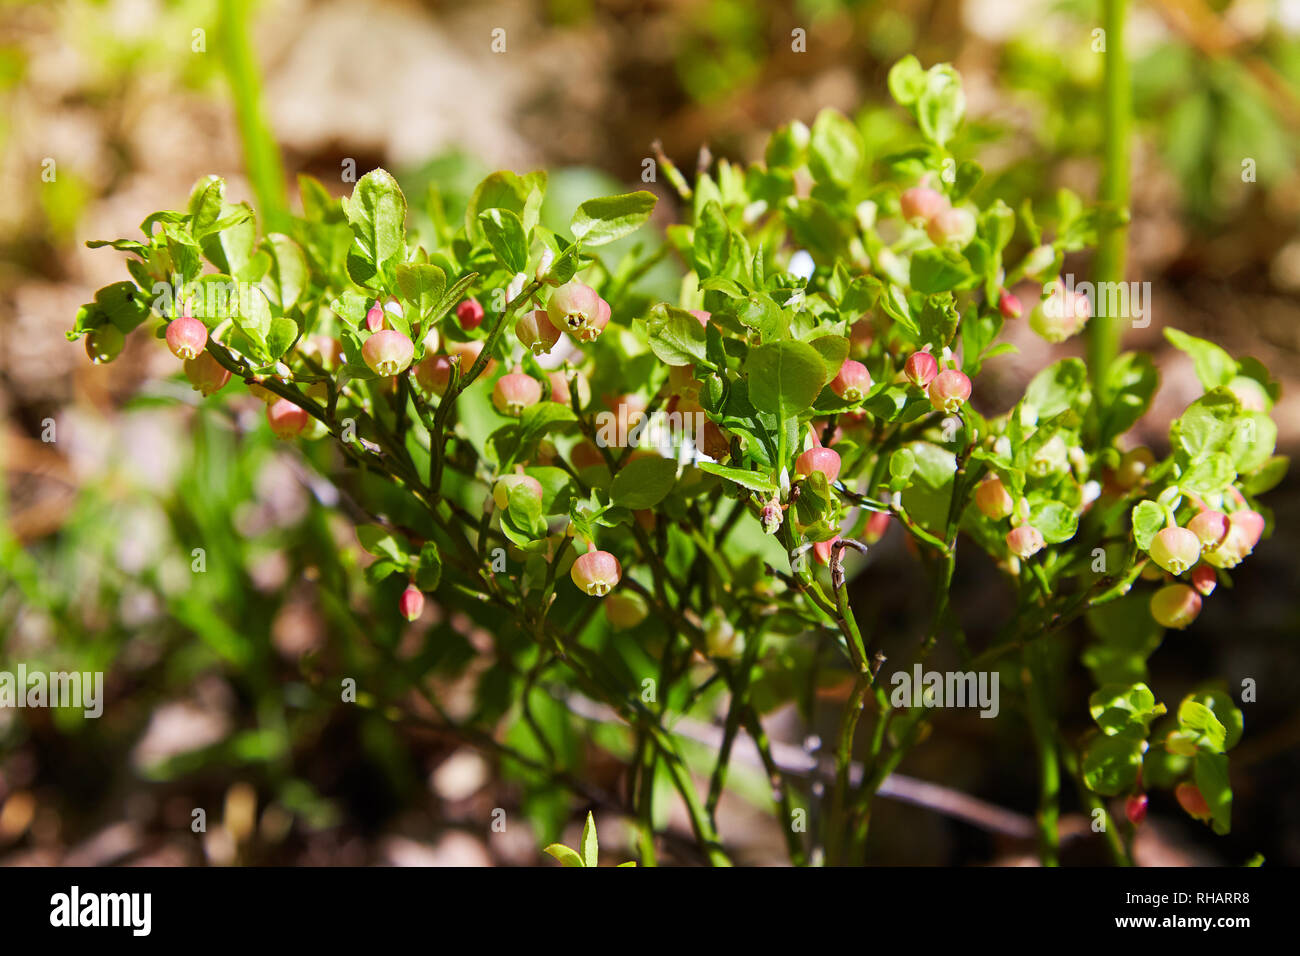 A shrub of European blueberry (Vaccinium uliginosum)  in bloom in the forest in May. Bushes with Green unripe blueberry in early spring. Wild Young bl Stock Photo